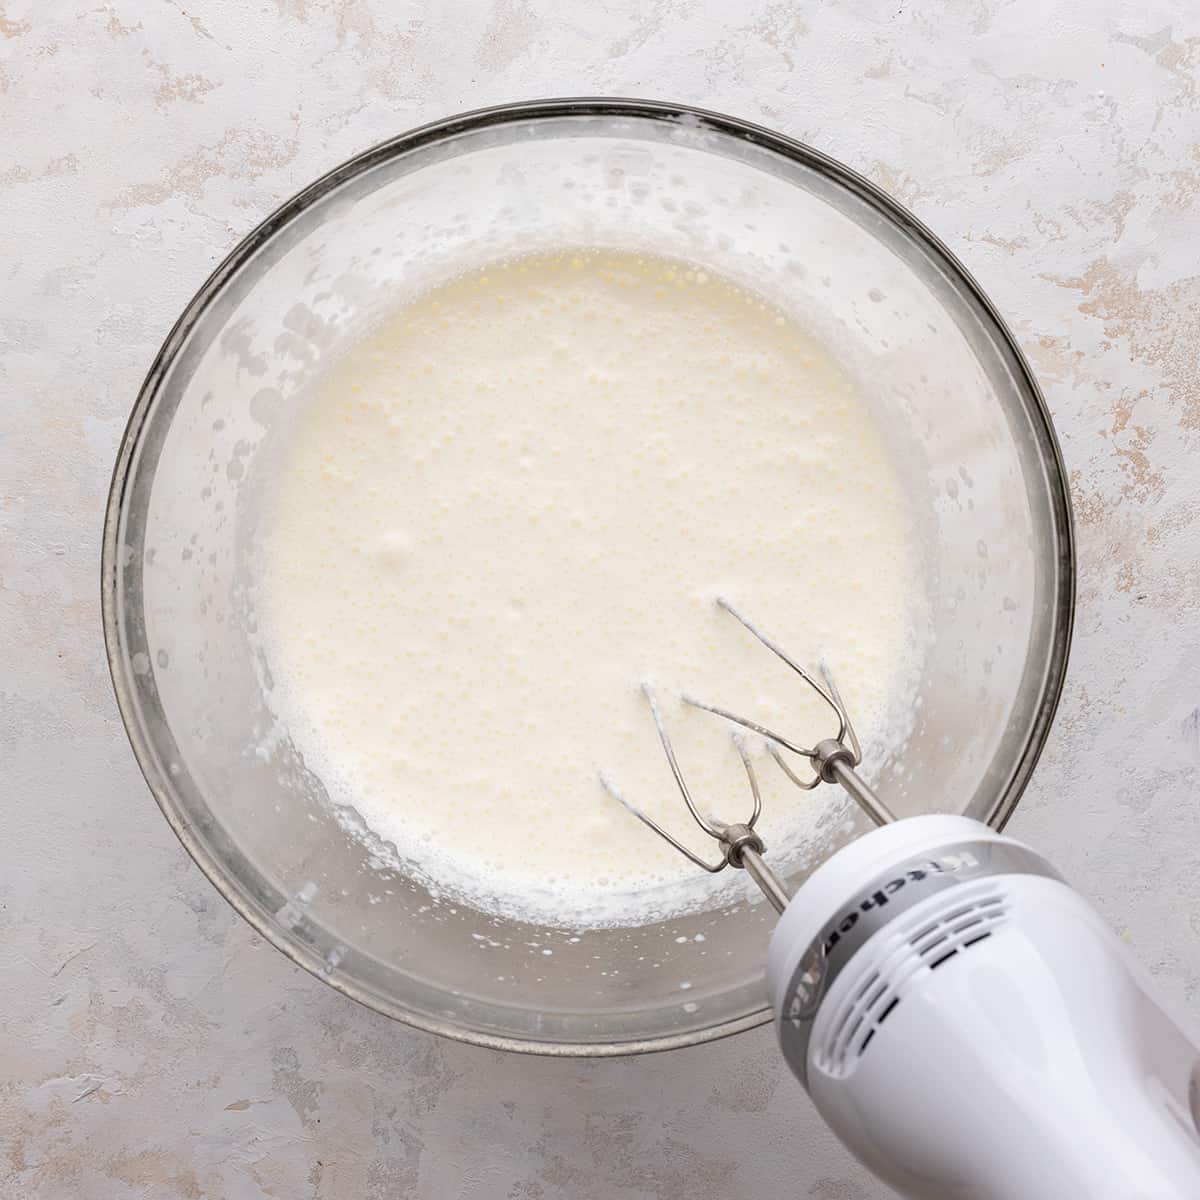 a mixer whipping heavy cream to make Chocolate Whipped Cream